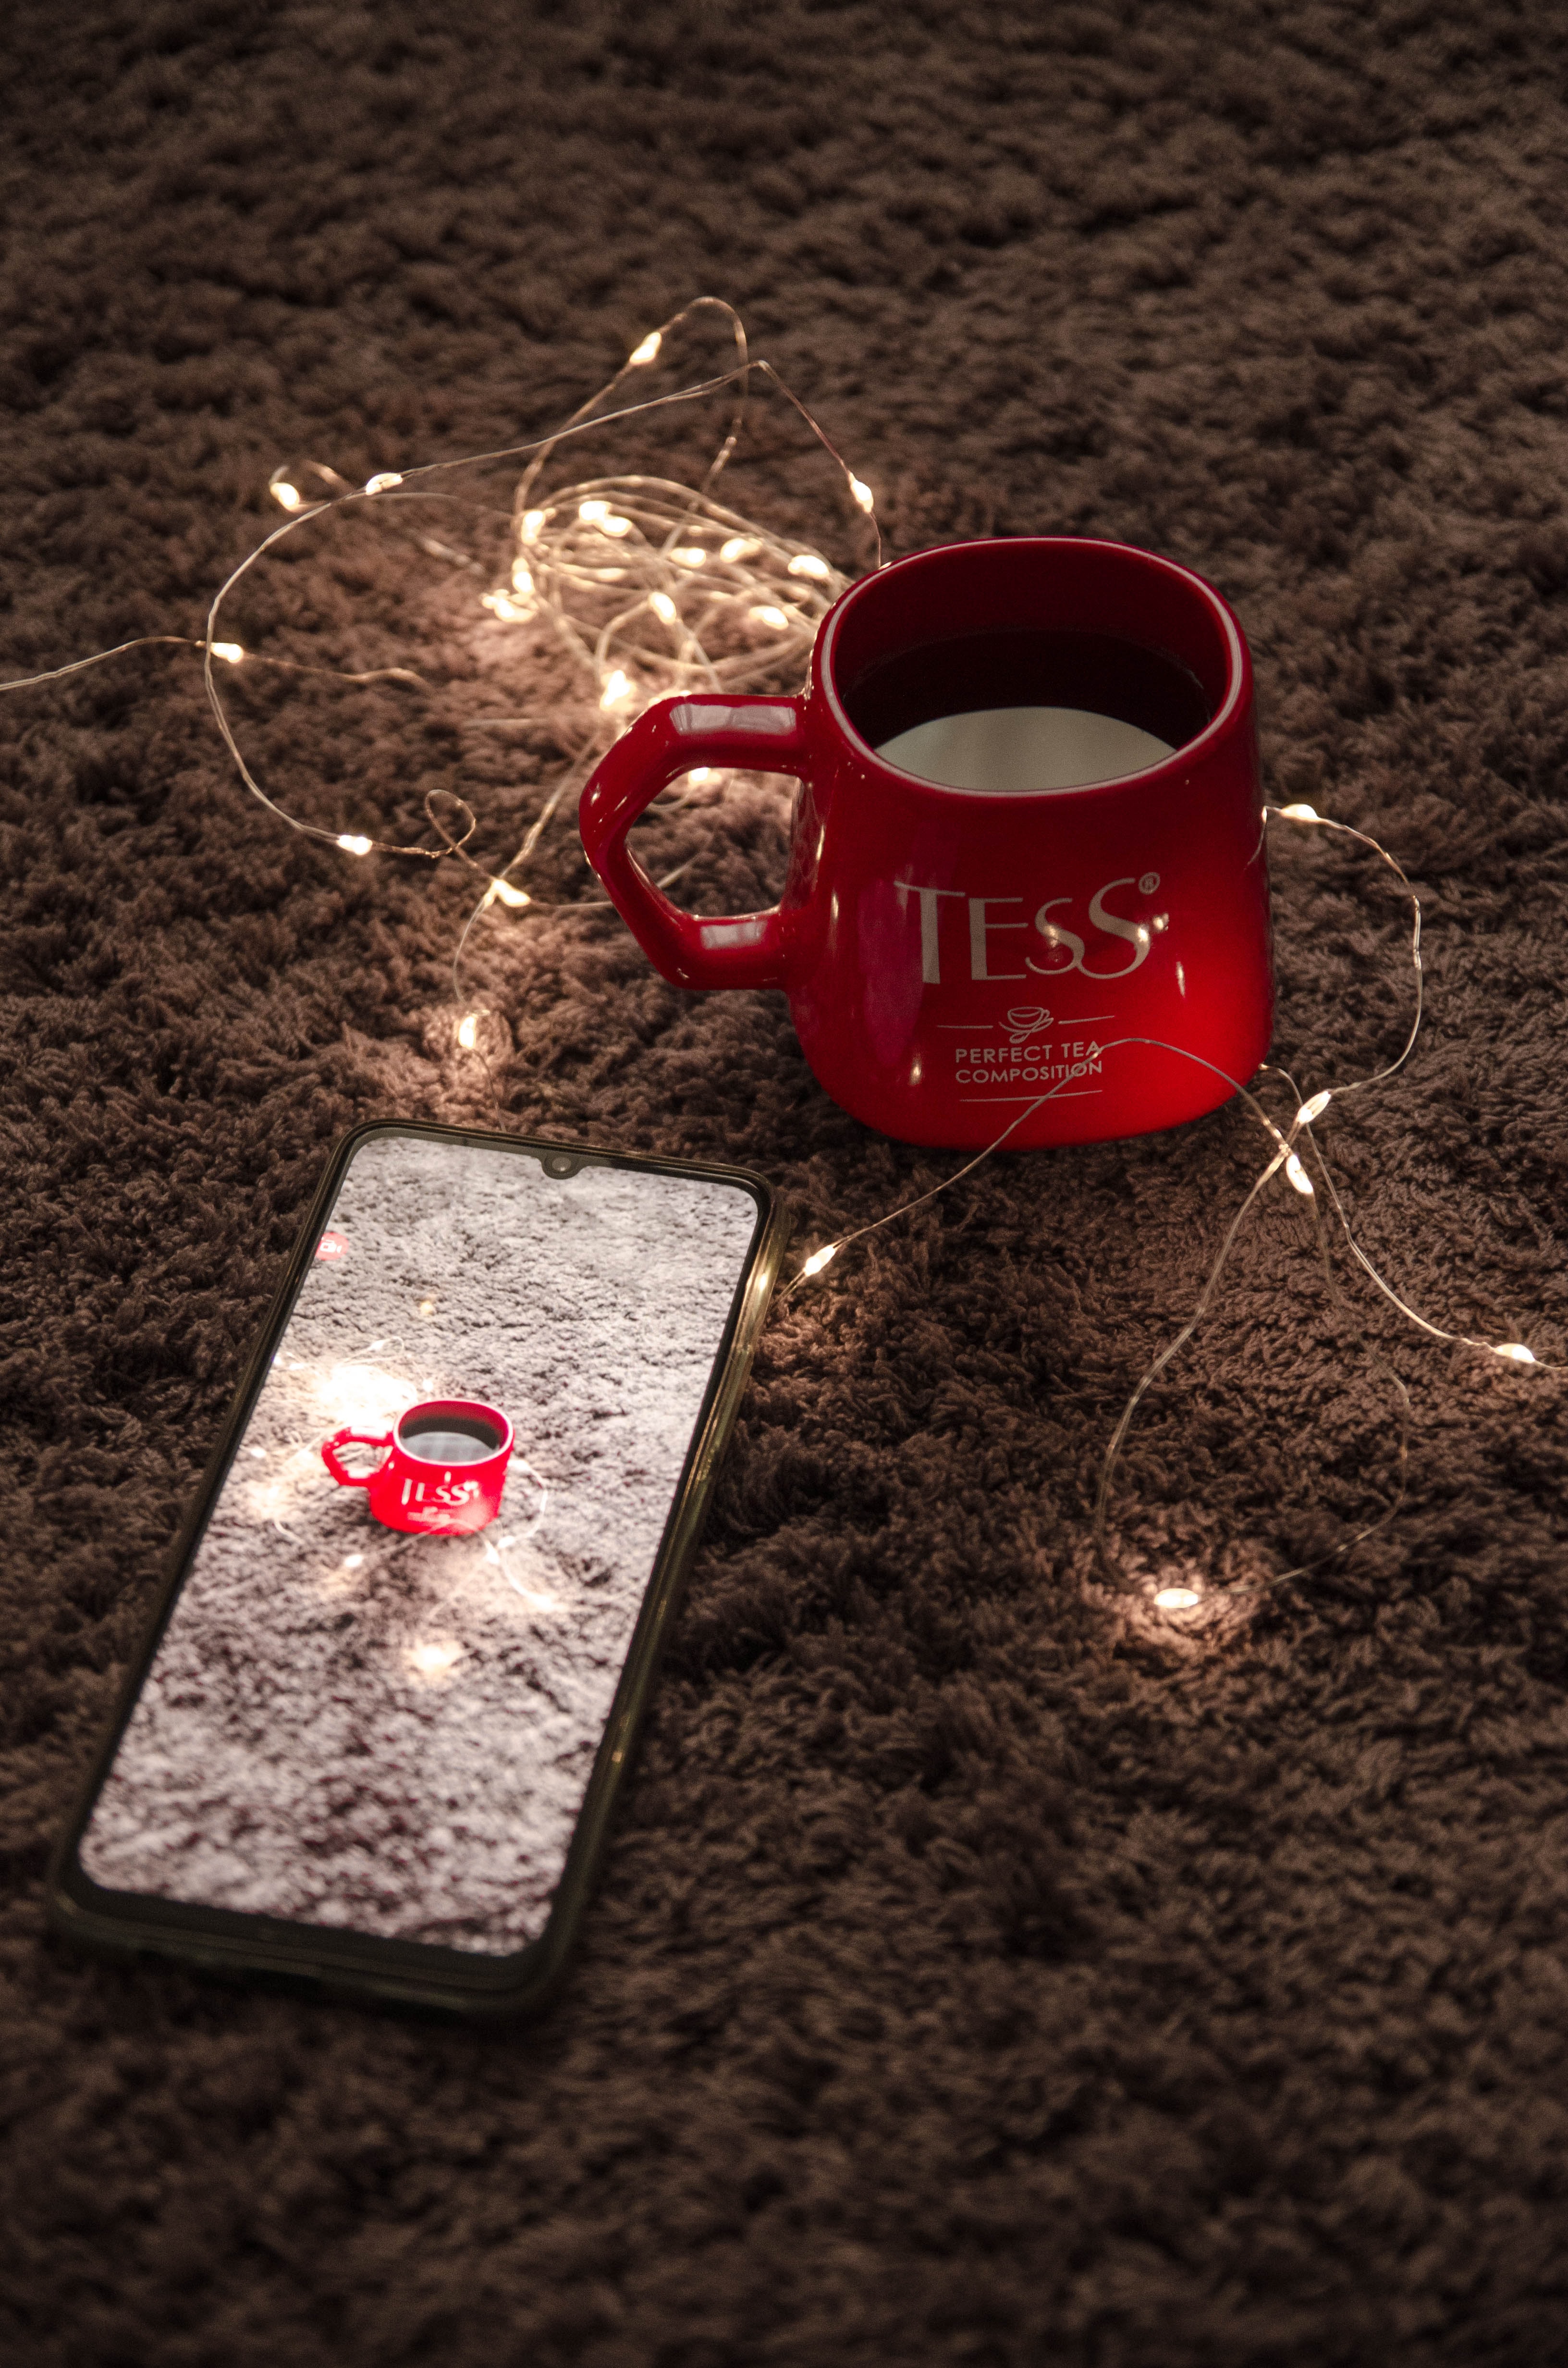 mug, cup, garland, miscellaneous, telephone, miscellanea, red